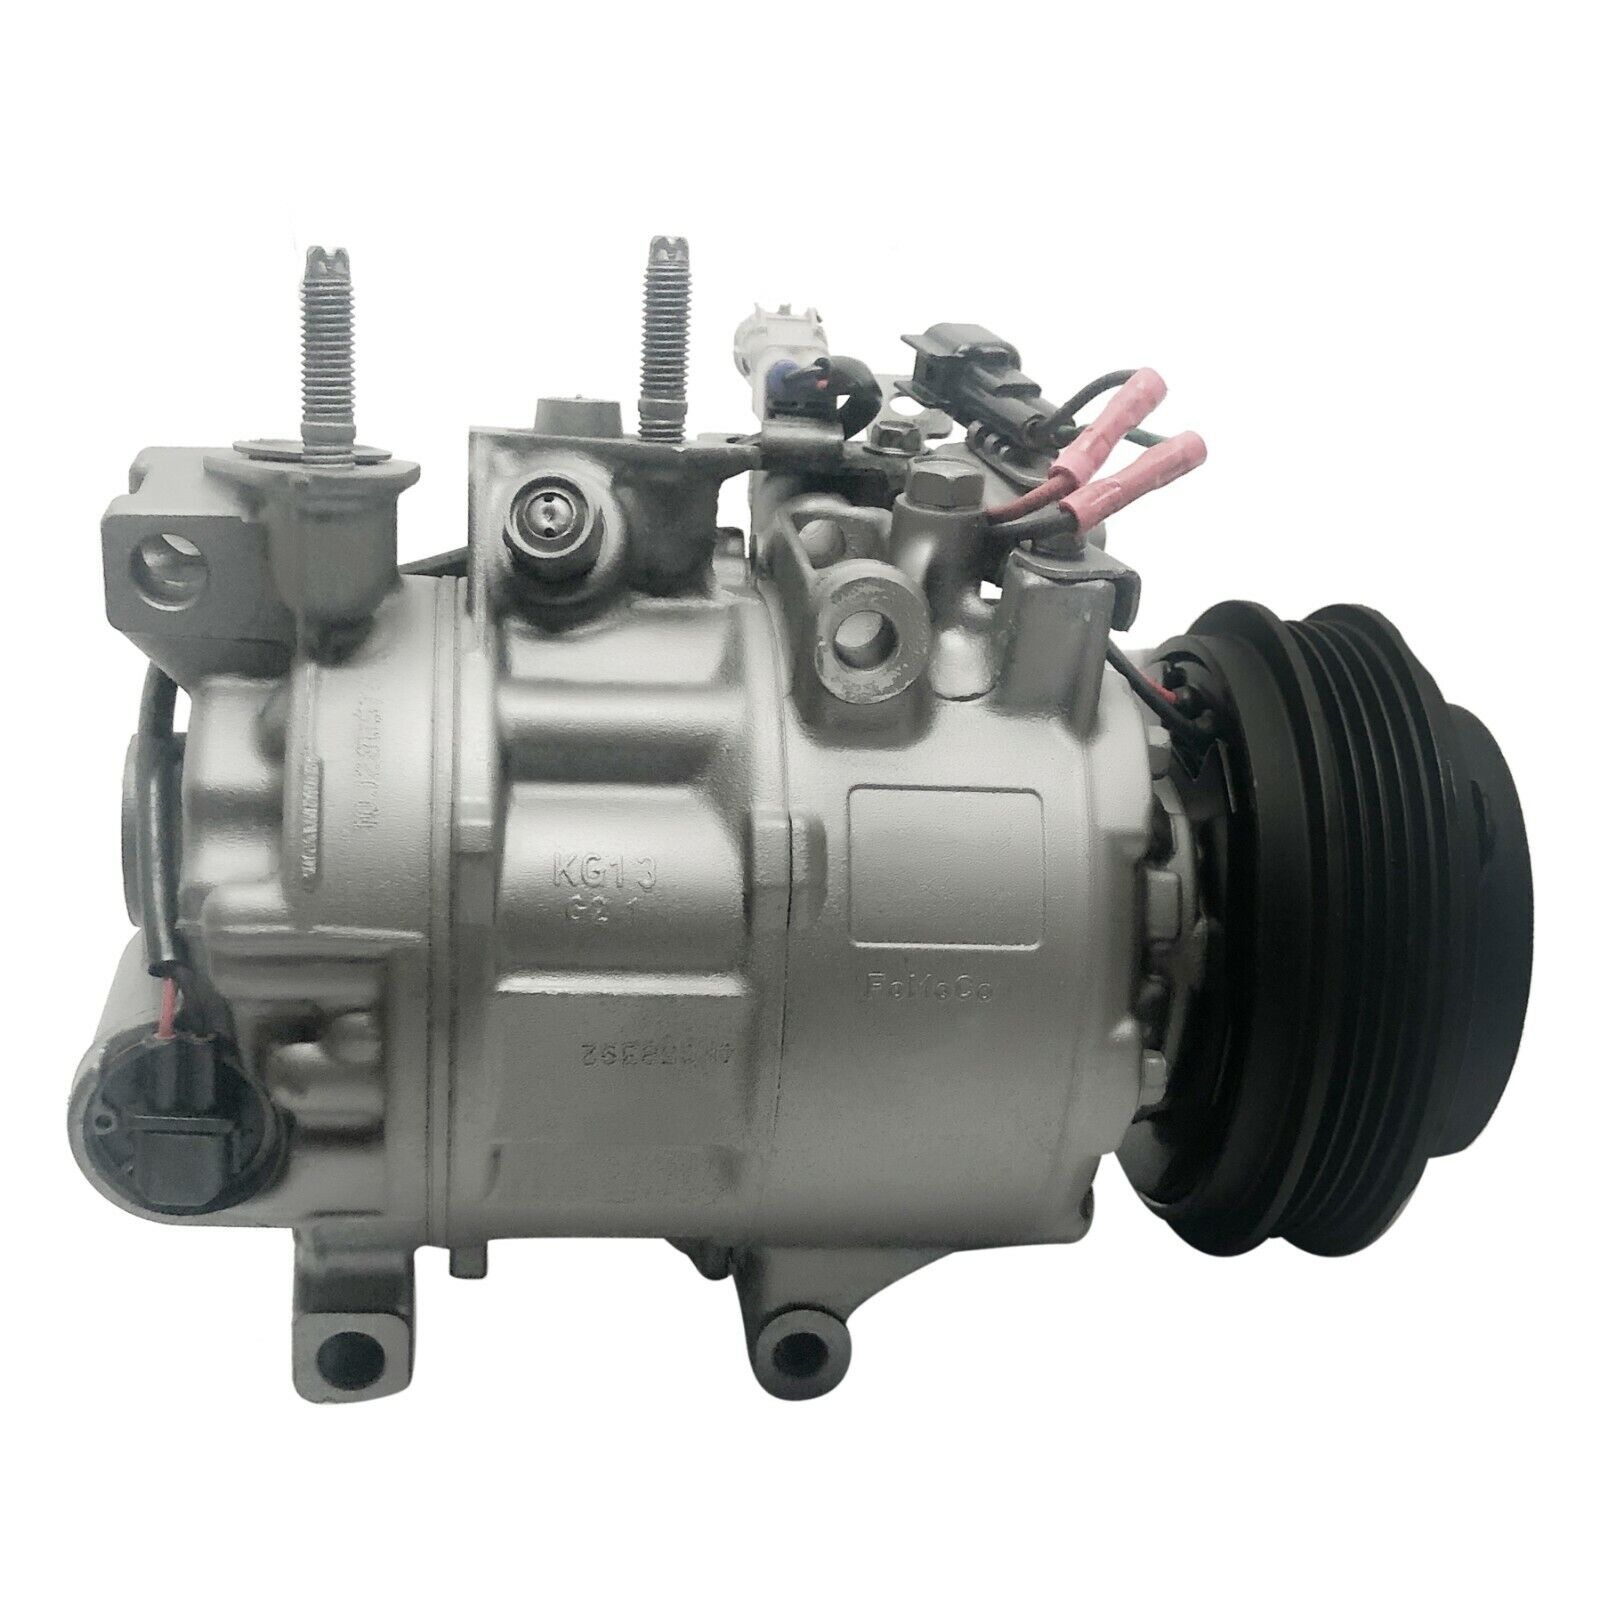 RYC Reman AC Compressor AAGG399 Fits Ford Focus 2.0L 2015 2016 2017 2018